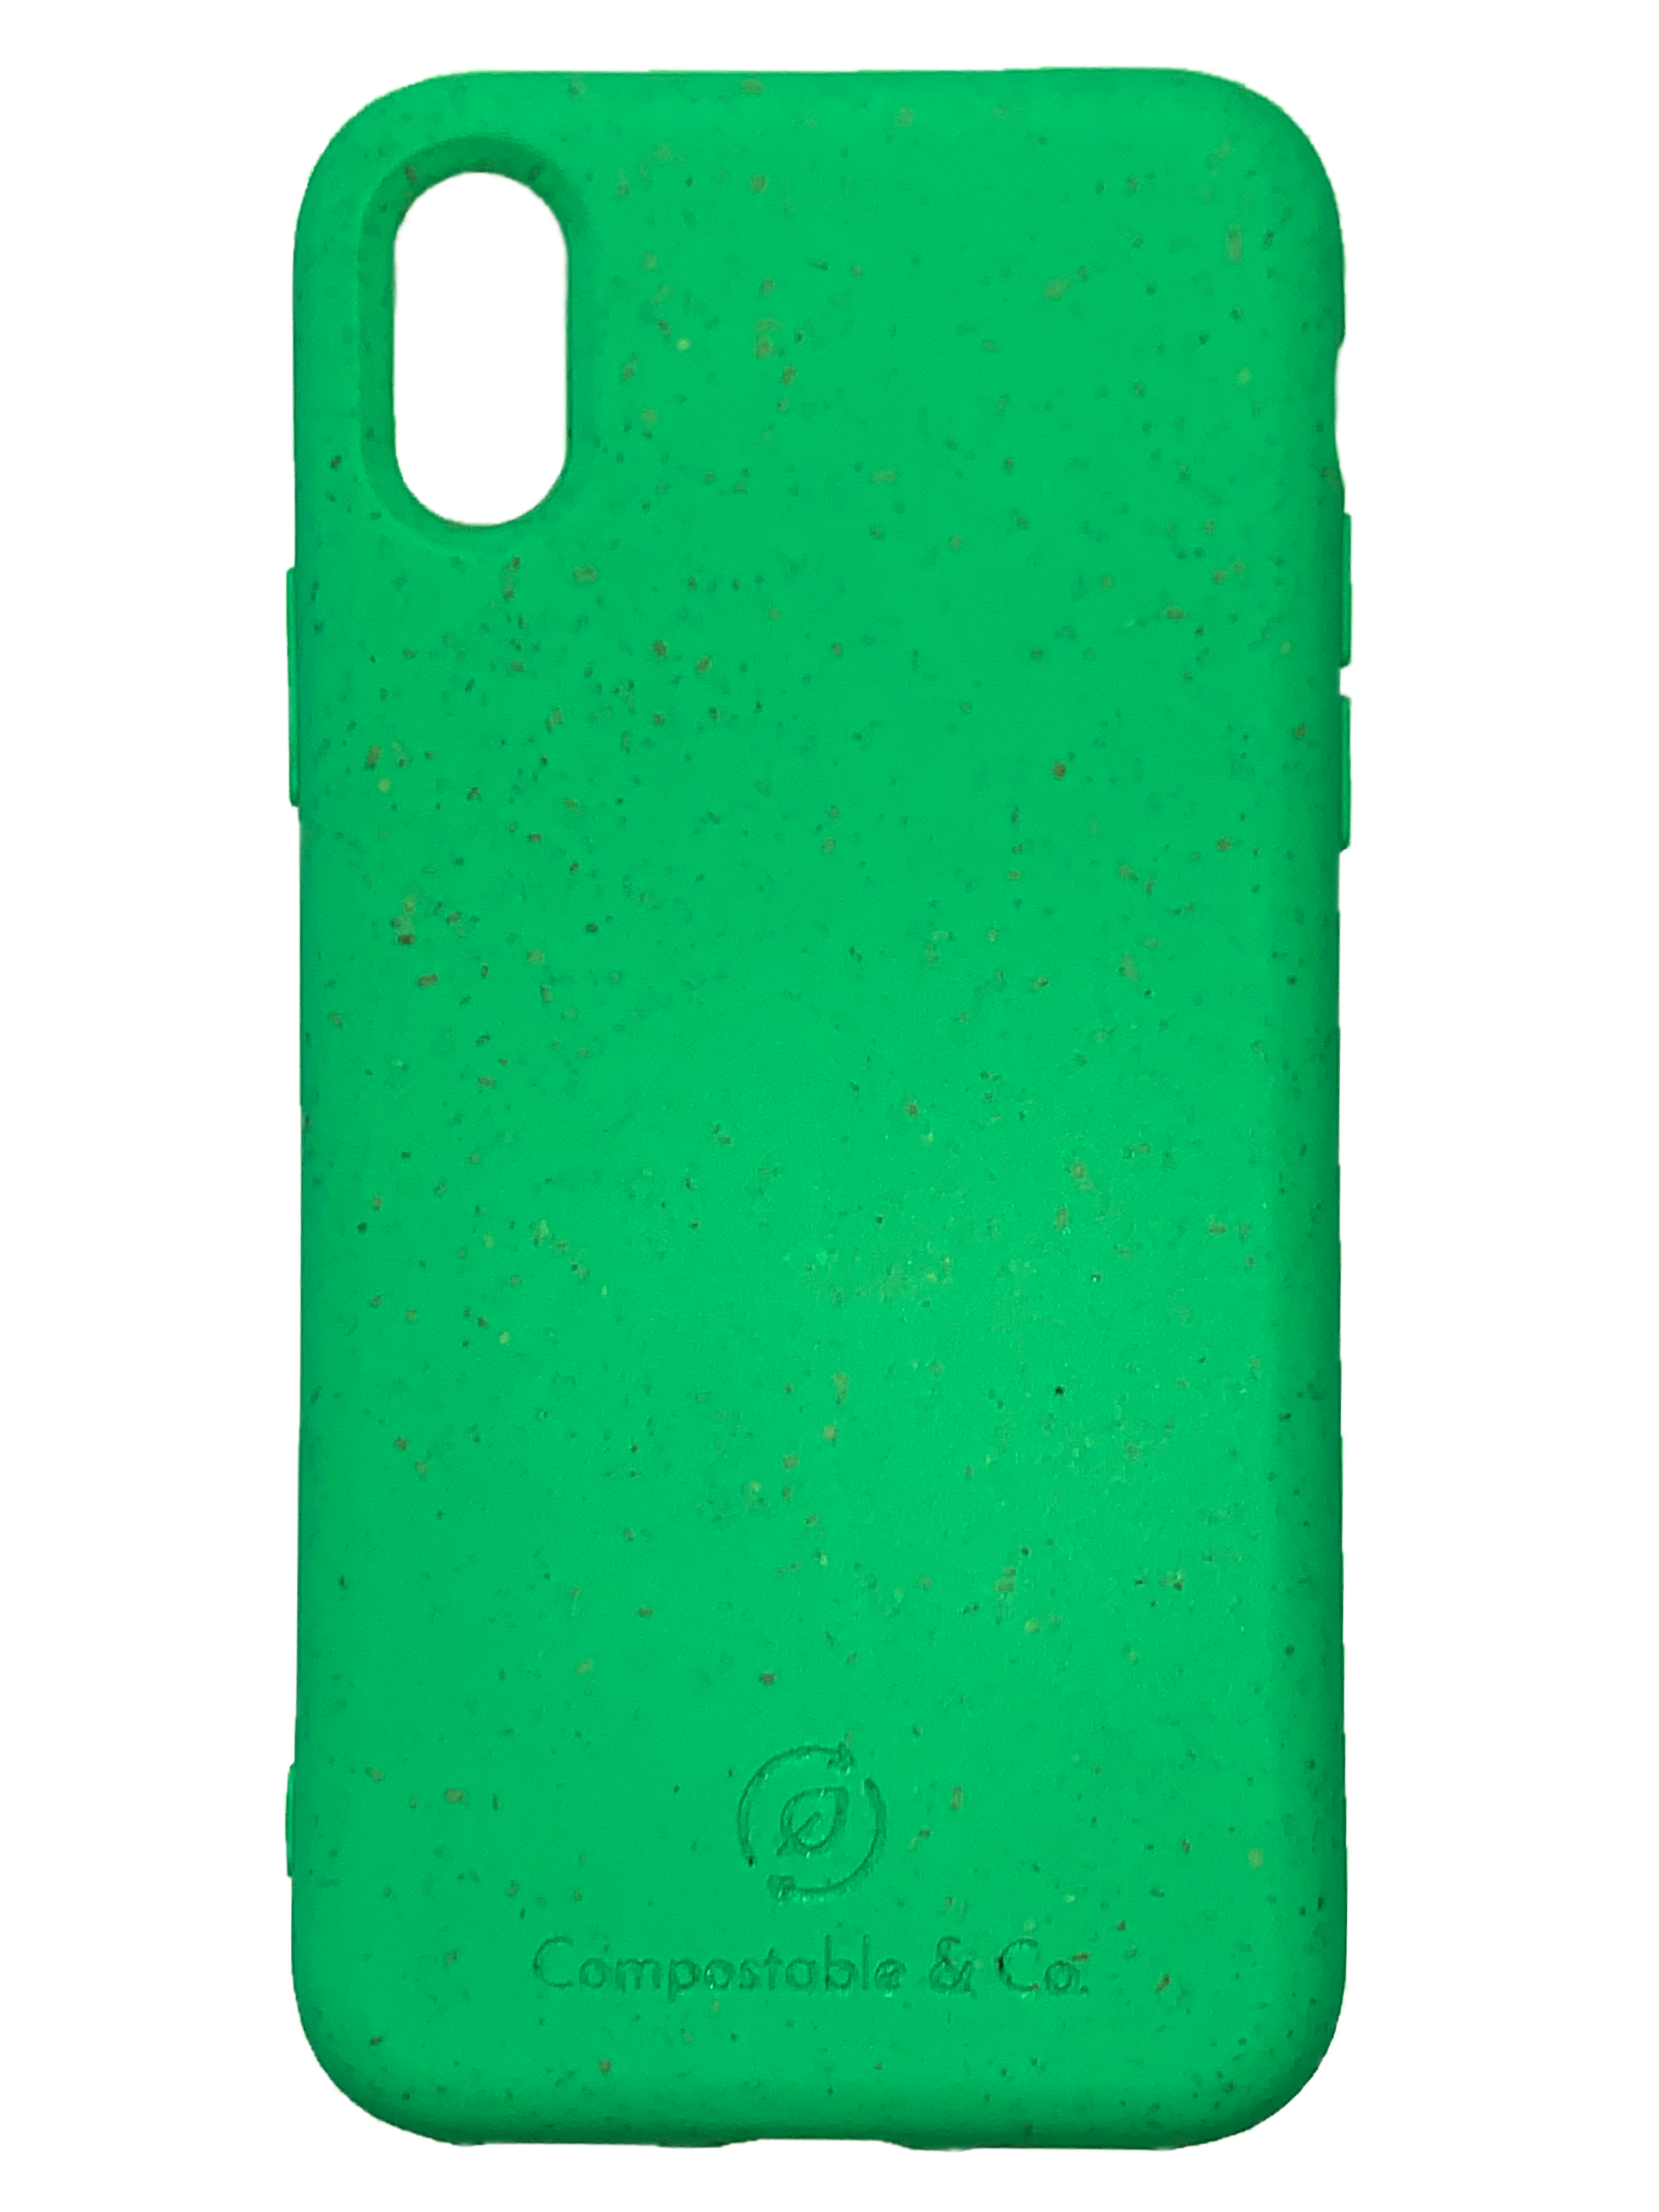 Compostable & Co. iPhone xr green biodegradable phone case